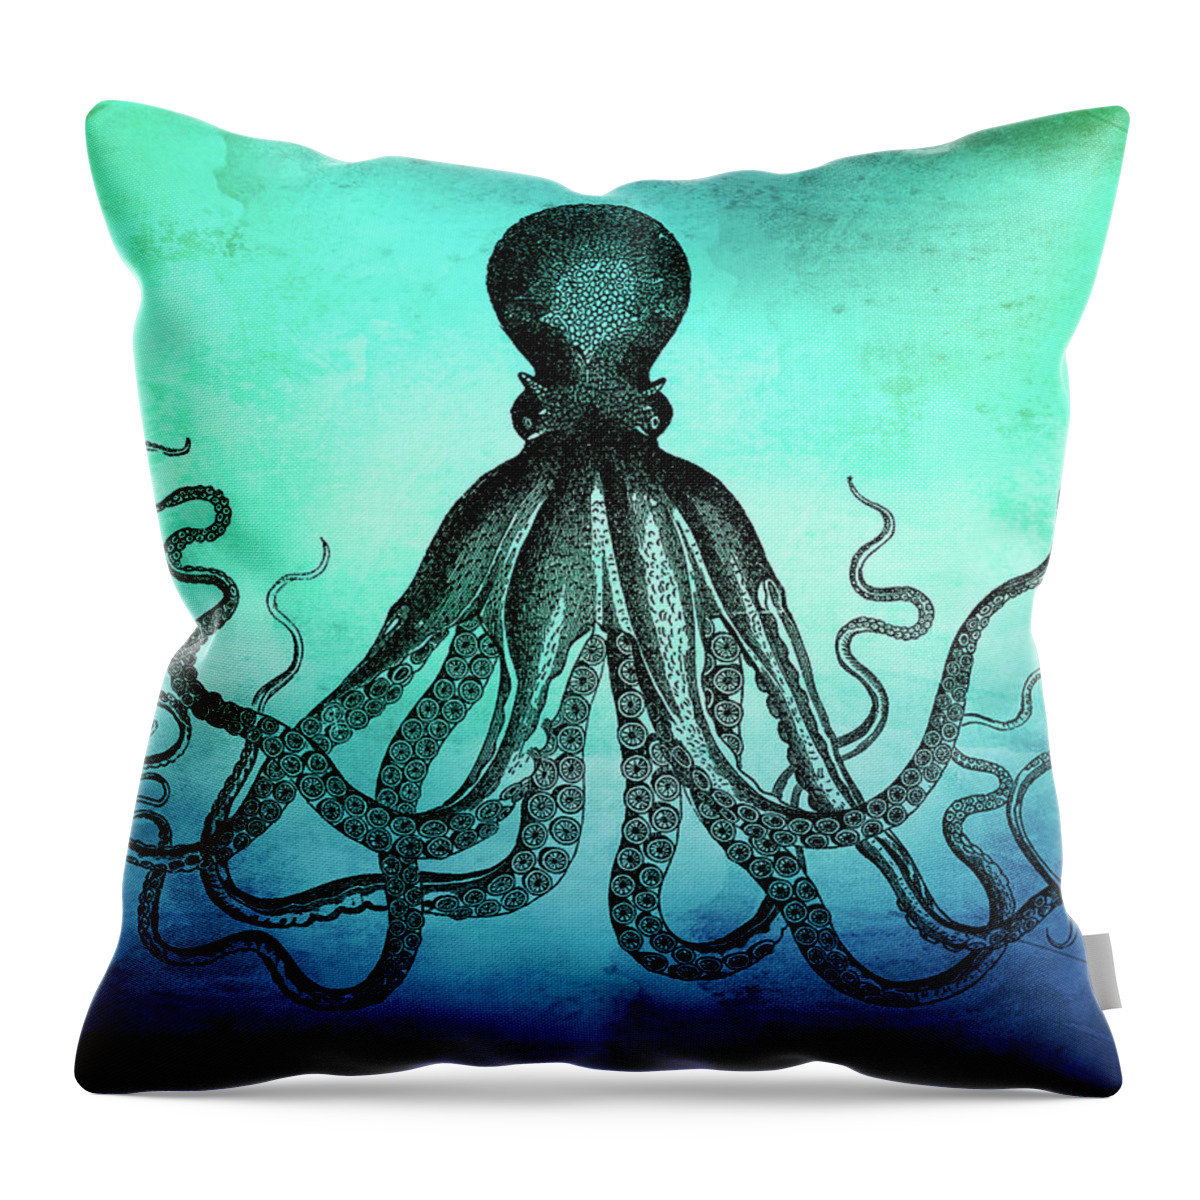 Octopus Throw Pillow featuring the digital art Vintage Octopus on Blue Green Watercolor by Peggy Collins